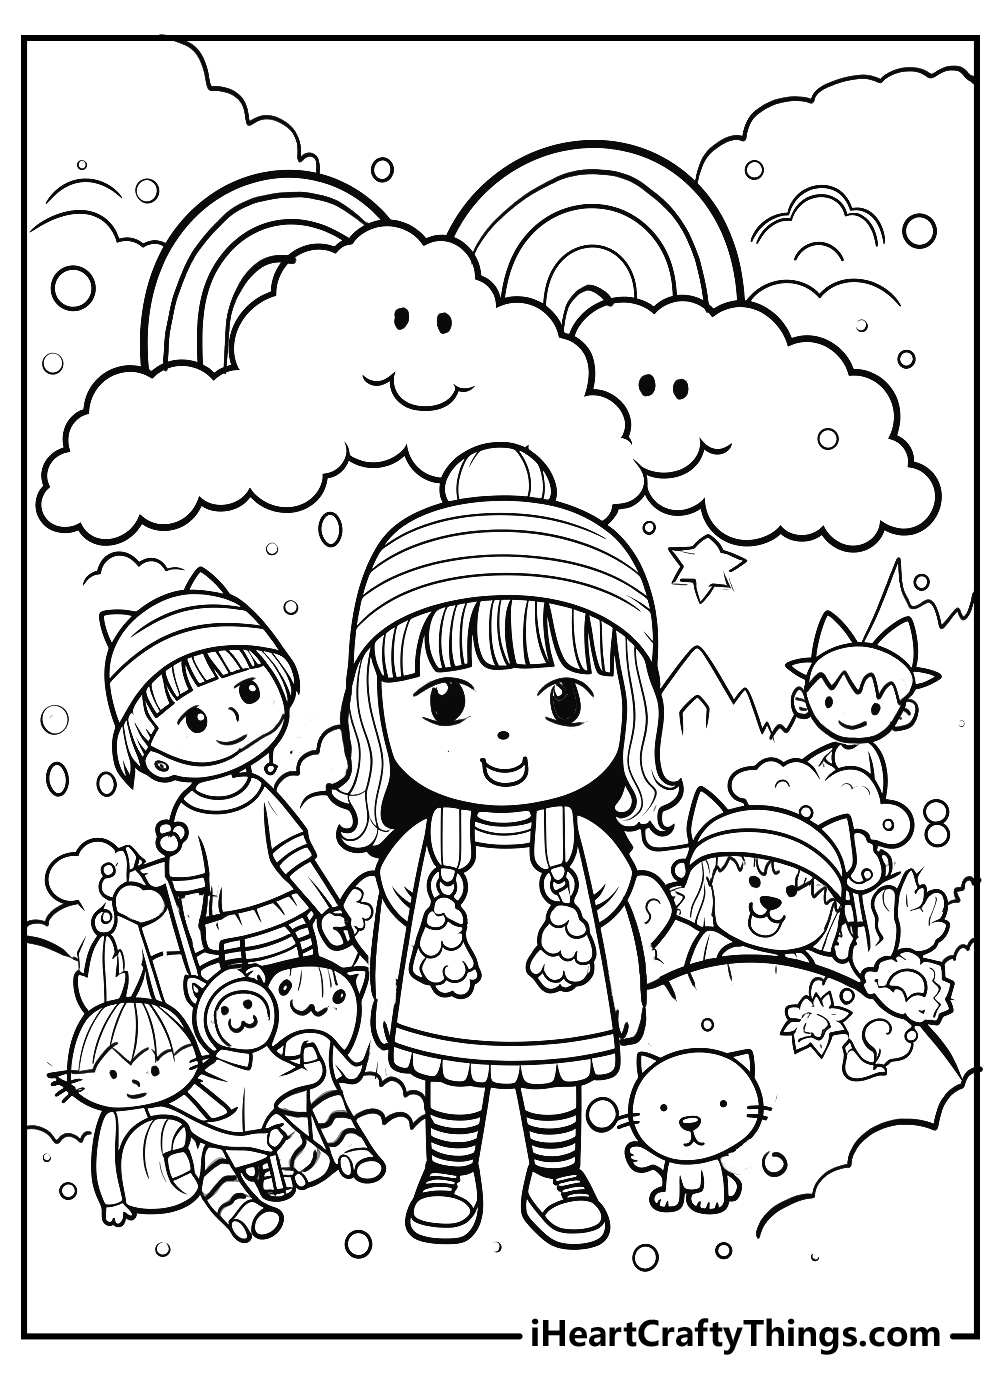 rainbow with friends coloring printable